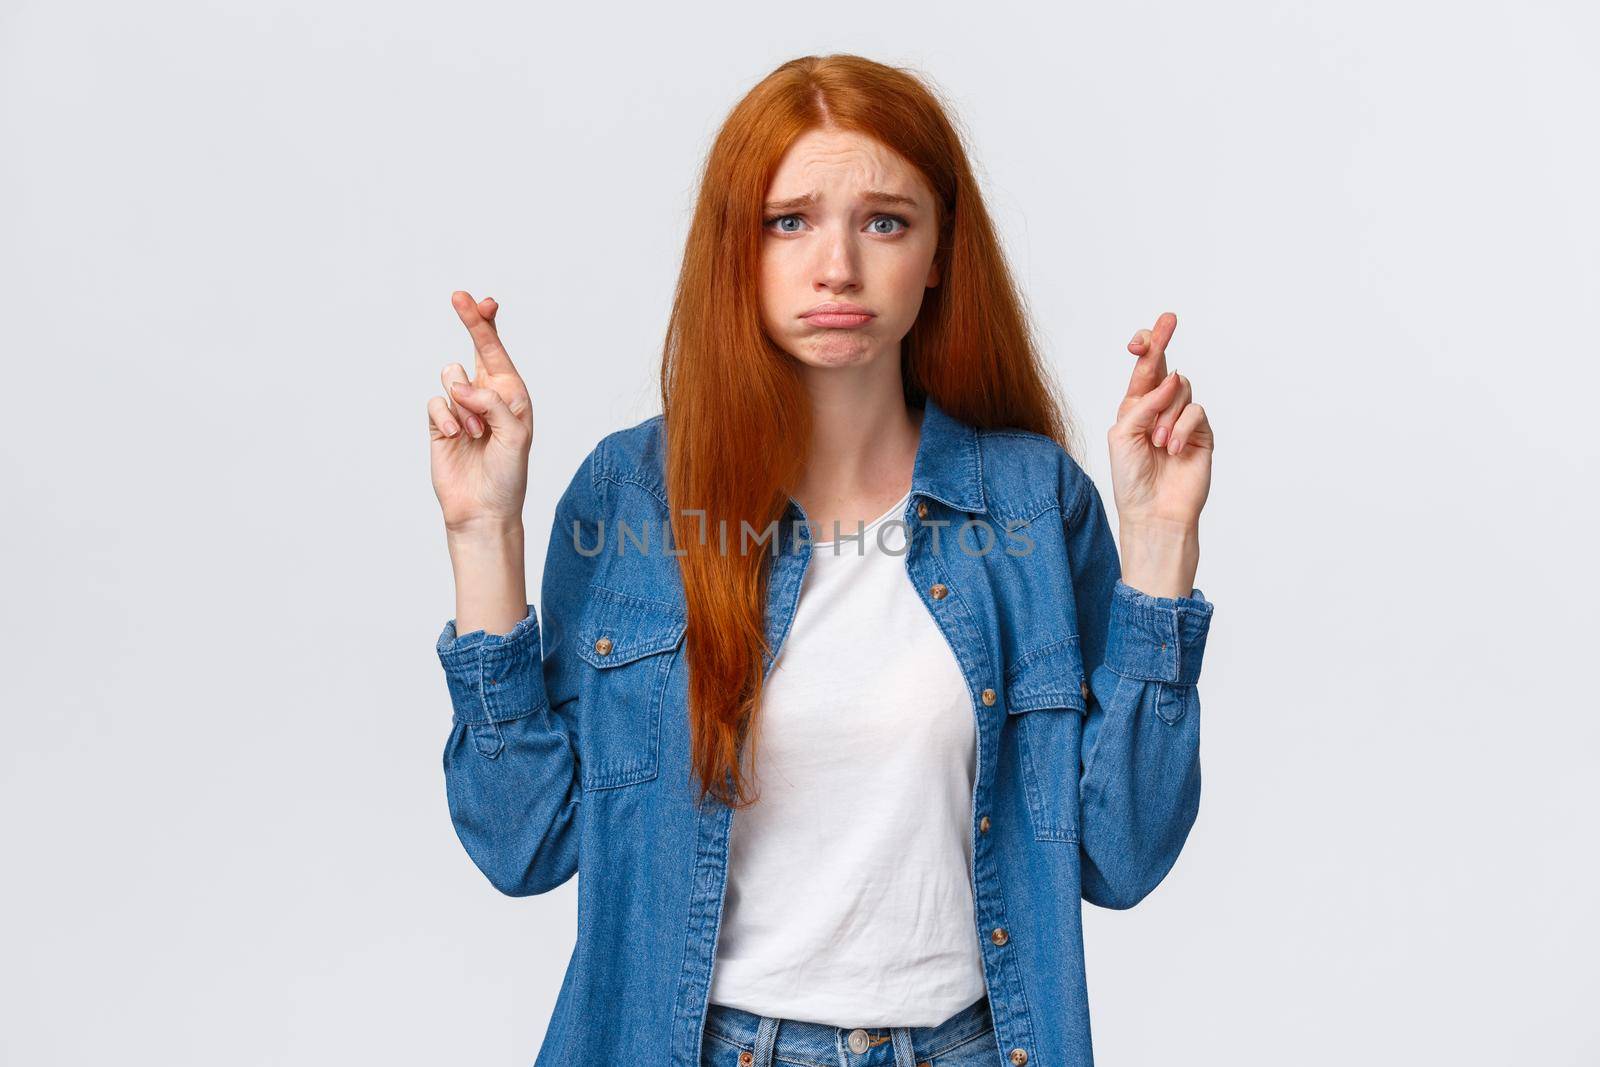 Girl hopes she passed exam. Worried and gloomy, hopeful redhead woman wishing dream come true, aspire something, pouting uneasy, cross fingers good luck, make wish over white background.